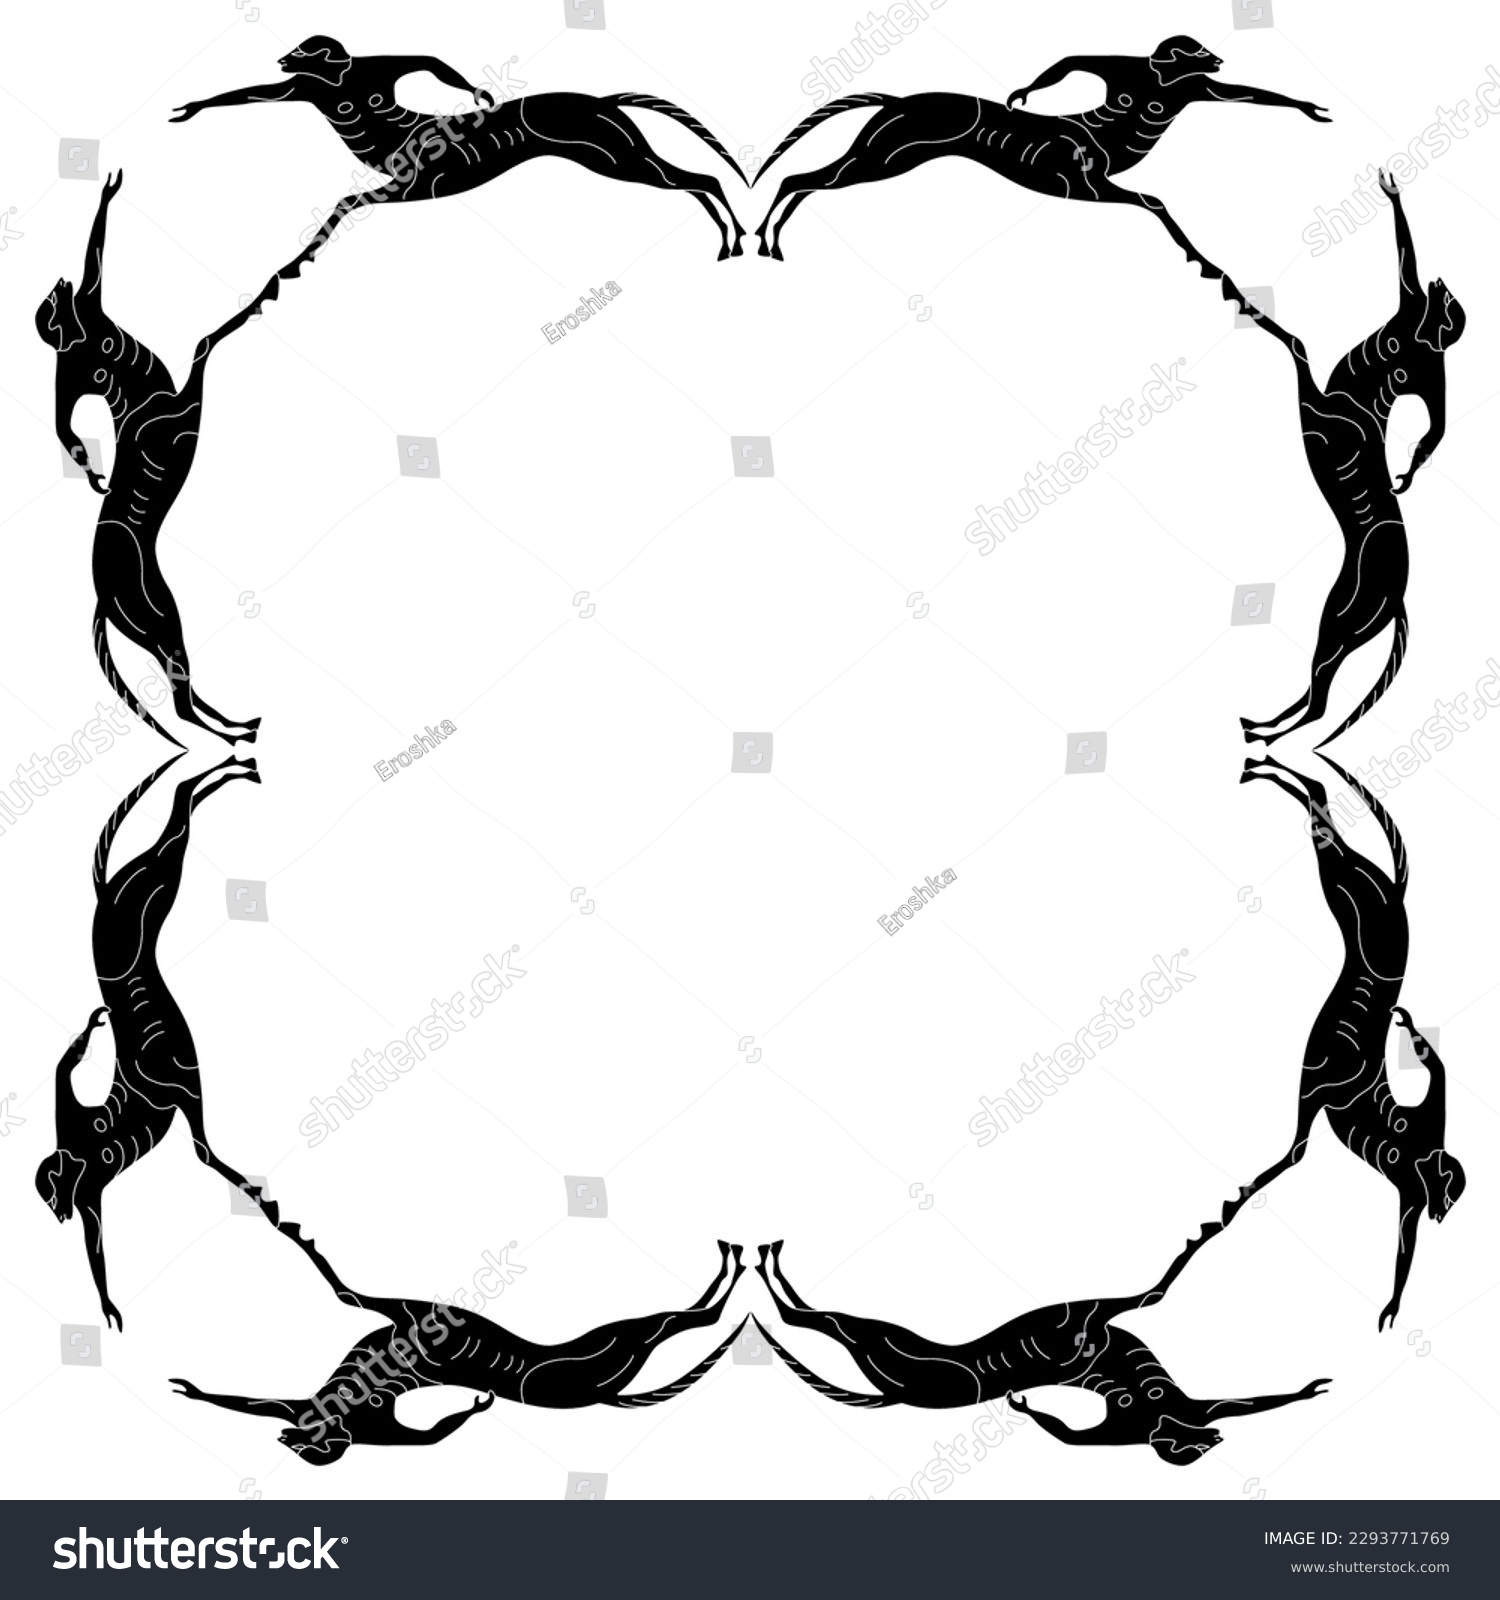 SVG of Geometrical ethnic frame with running ancient Greek centaurs. Half men half horses. Vase painting style. Black and white silhouette. svg